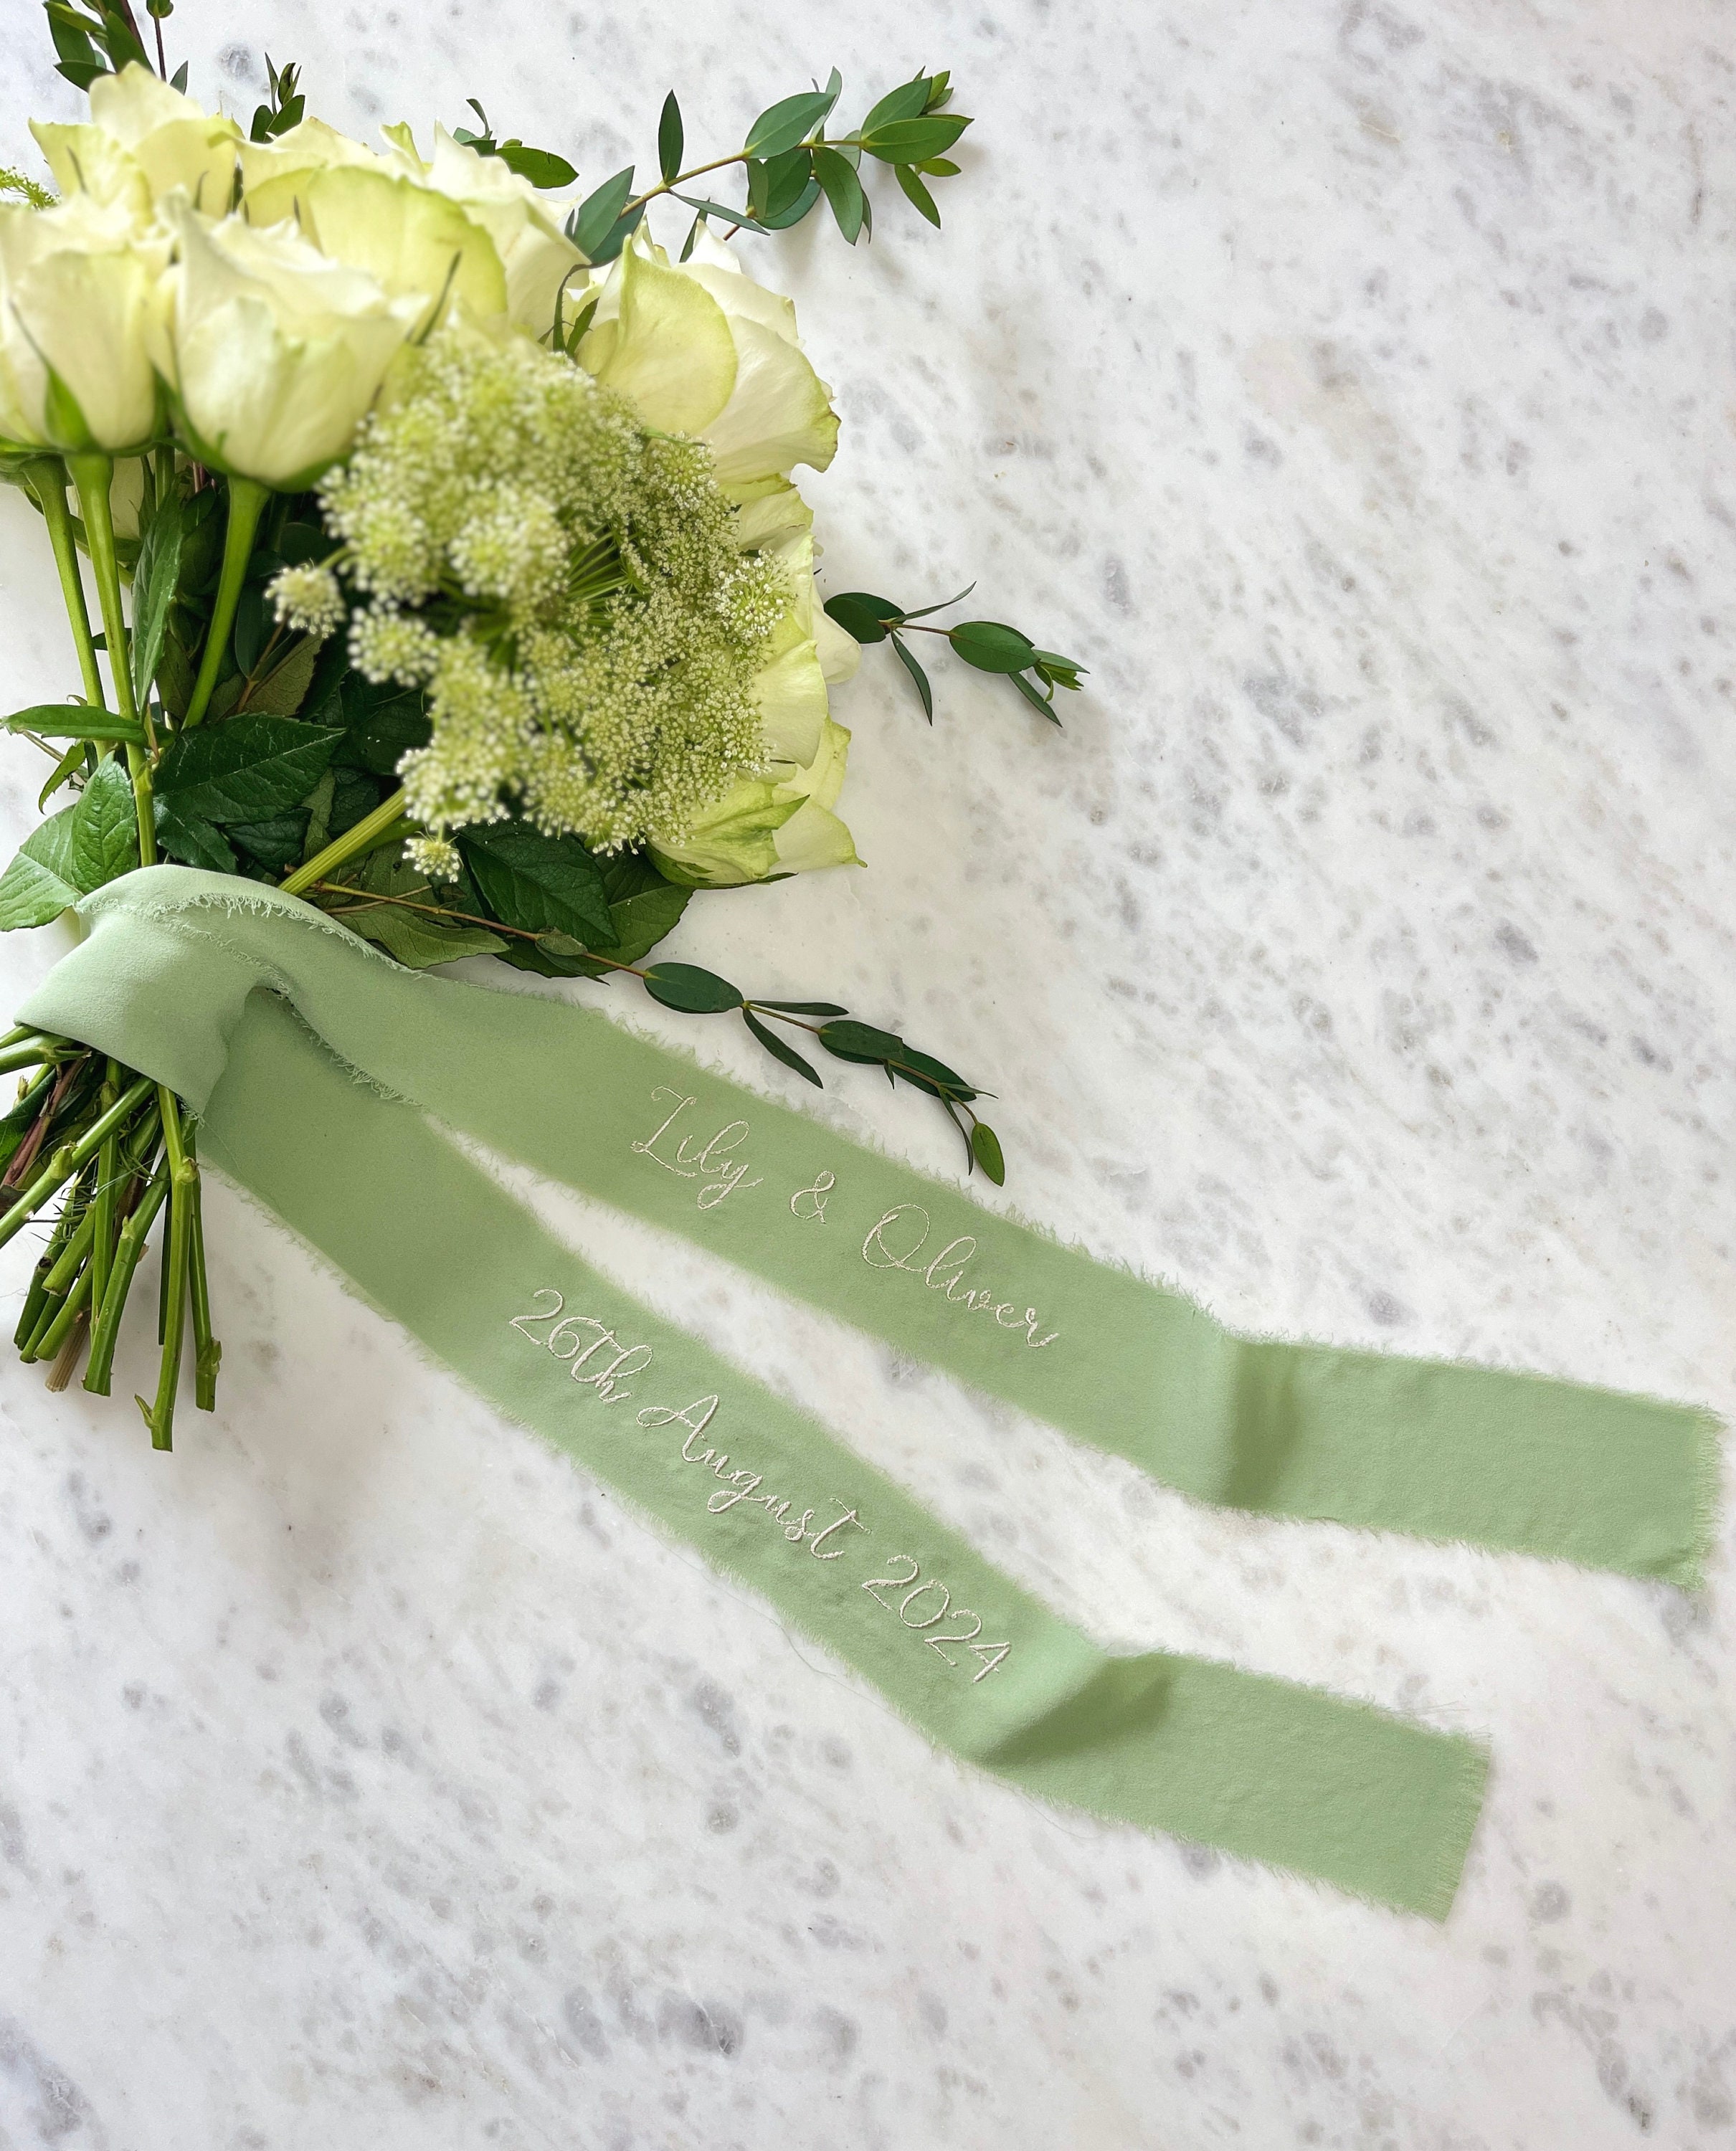 Personalized ribbons for flower bouquets 💐💖 𝘳𝘢𝘮𝘰 𝘮𝘢𝘥𝘦 𝘣𝘺 @, Ribbon Bouquet